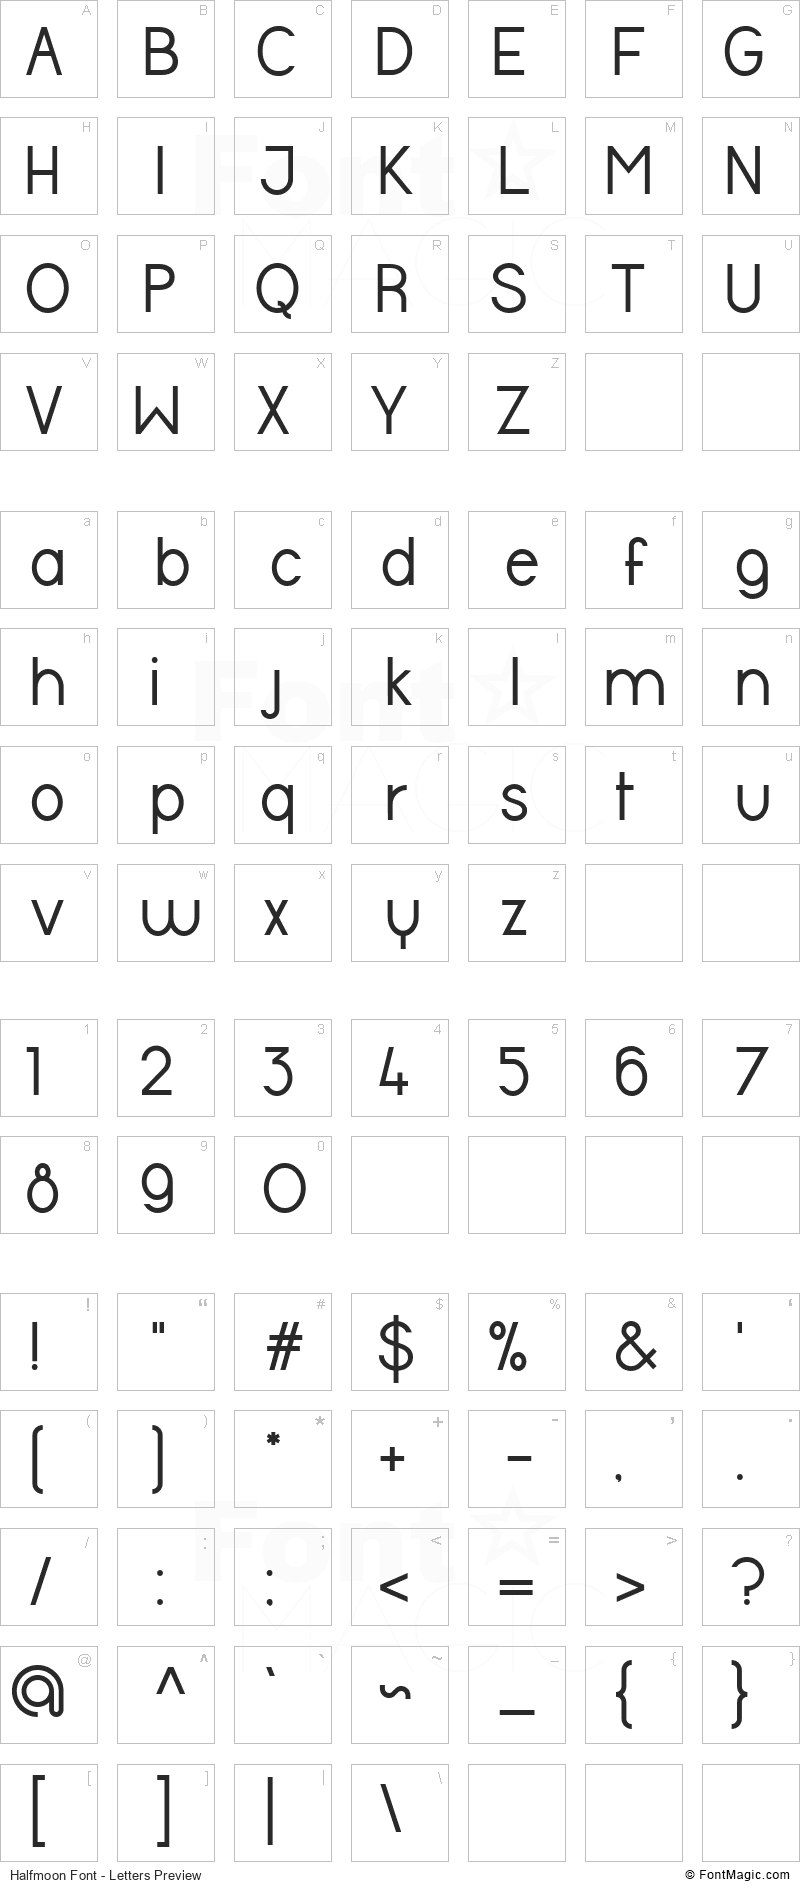 Halfmoon Font - All Latters Preview Chart